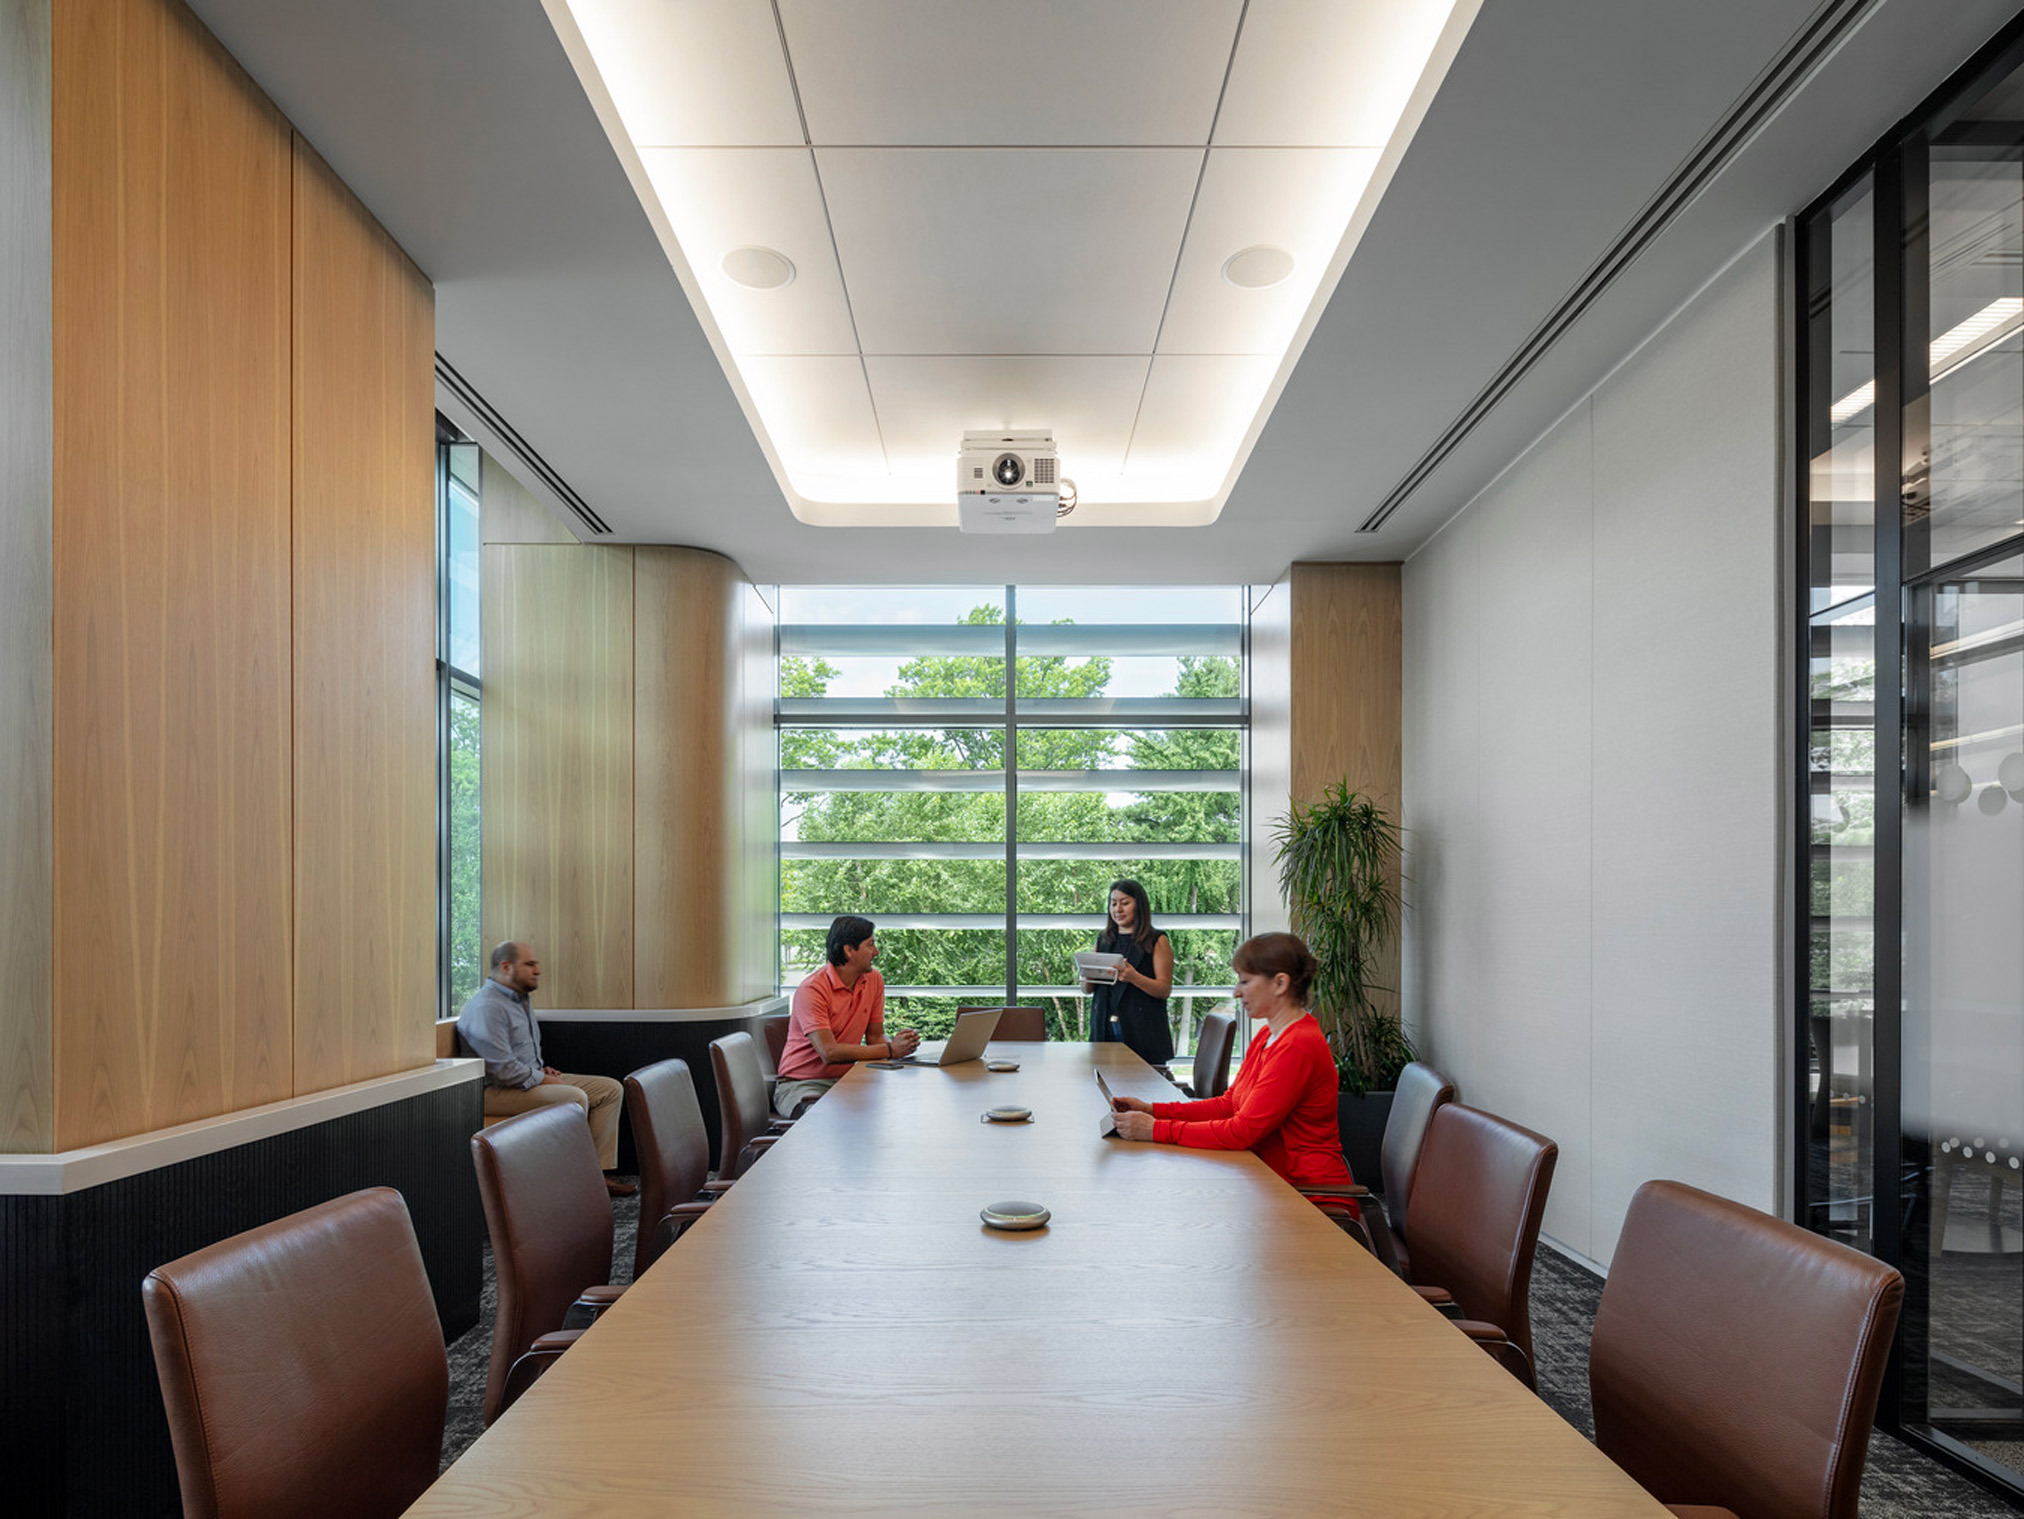 Modern conference room with natural wood paneling, ambient lighting, a sleek rectangular table, and ergonomic chairs. Equipped with audio-visual technology for presentations, the space balances function and style, fostering a collaborative working environment.